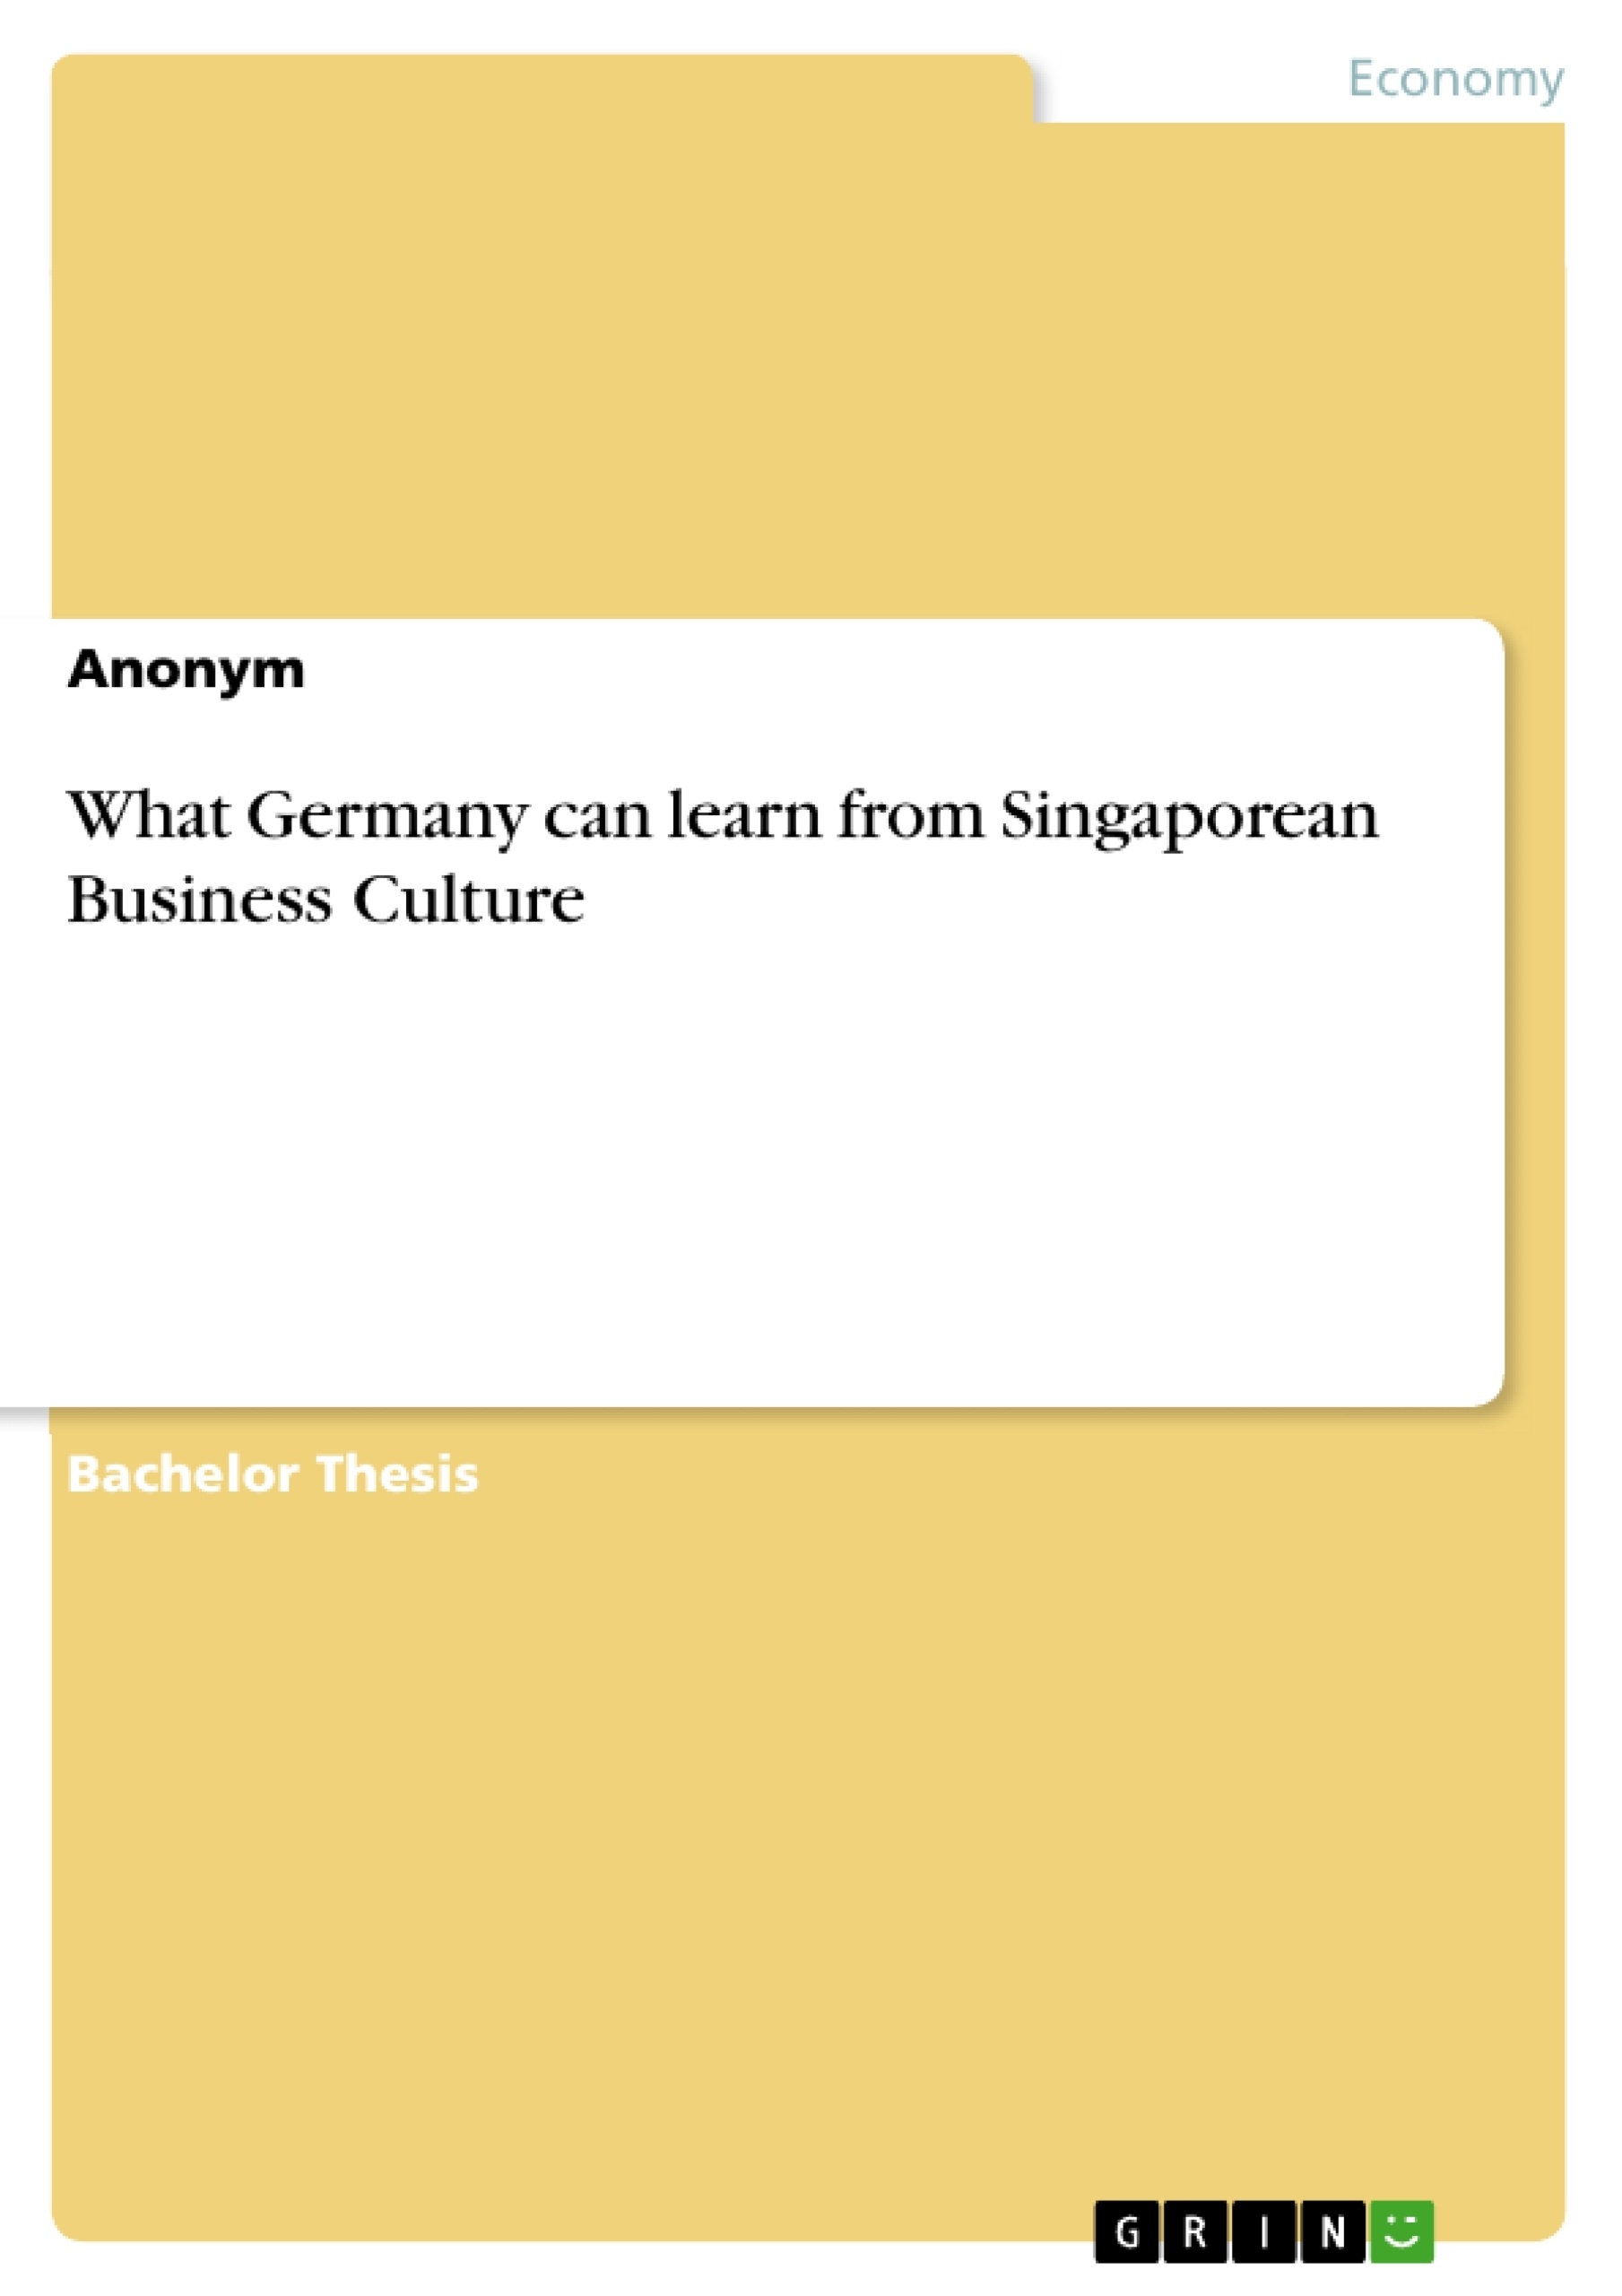 Titre: What Germany can learn from Singaporean Business Culture